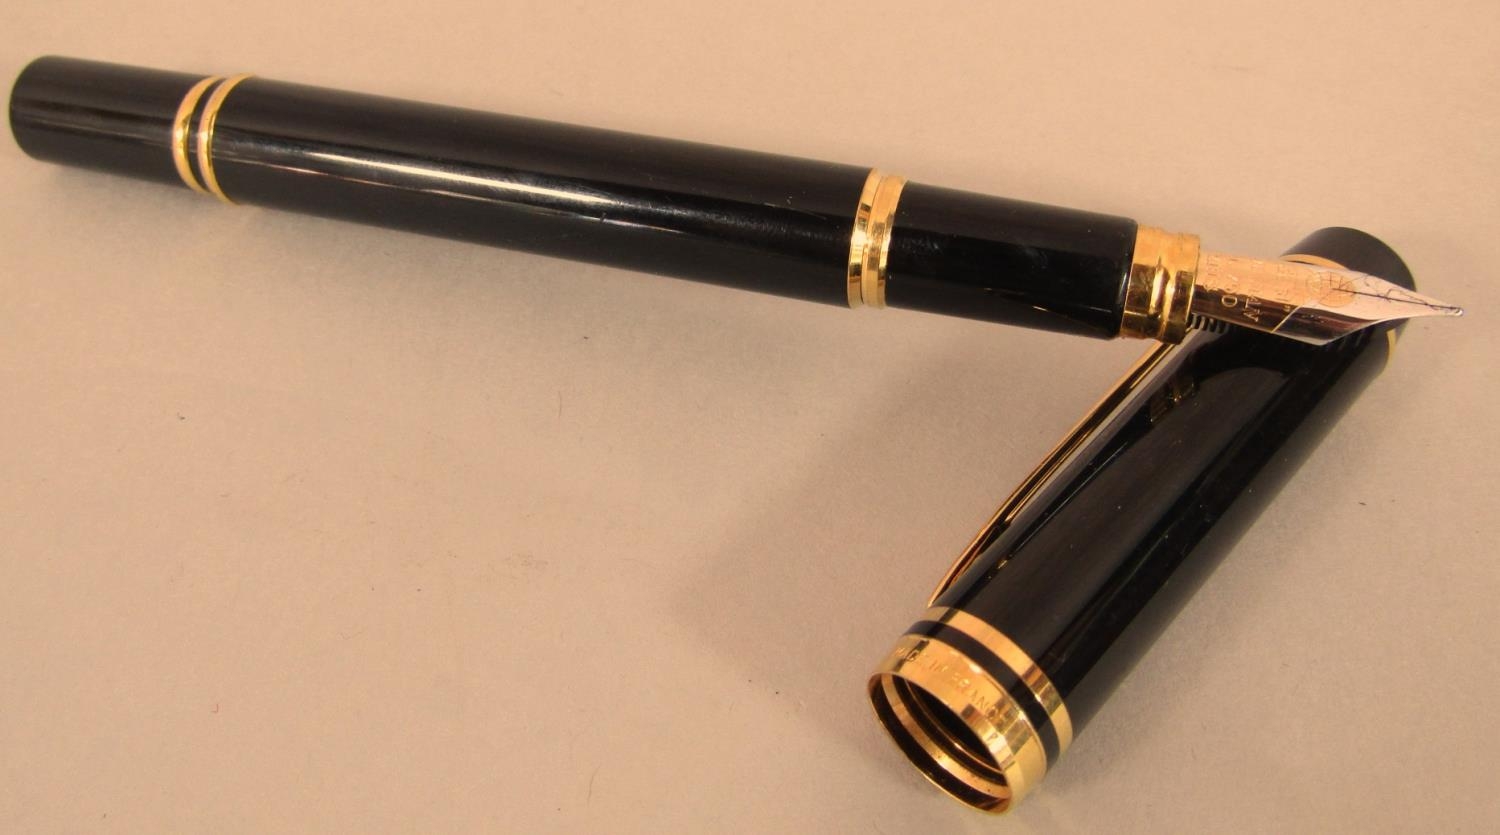 Watermans fountain pen in black and gold with 18ct nib and matching ball point pen - Image 2 of 2